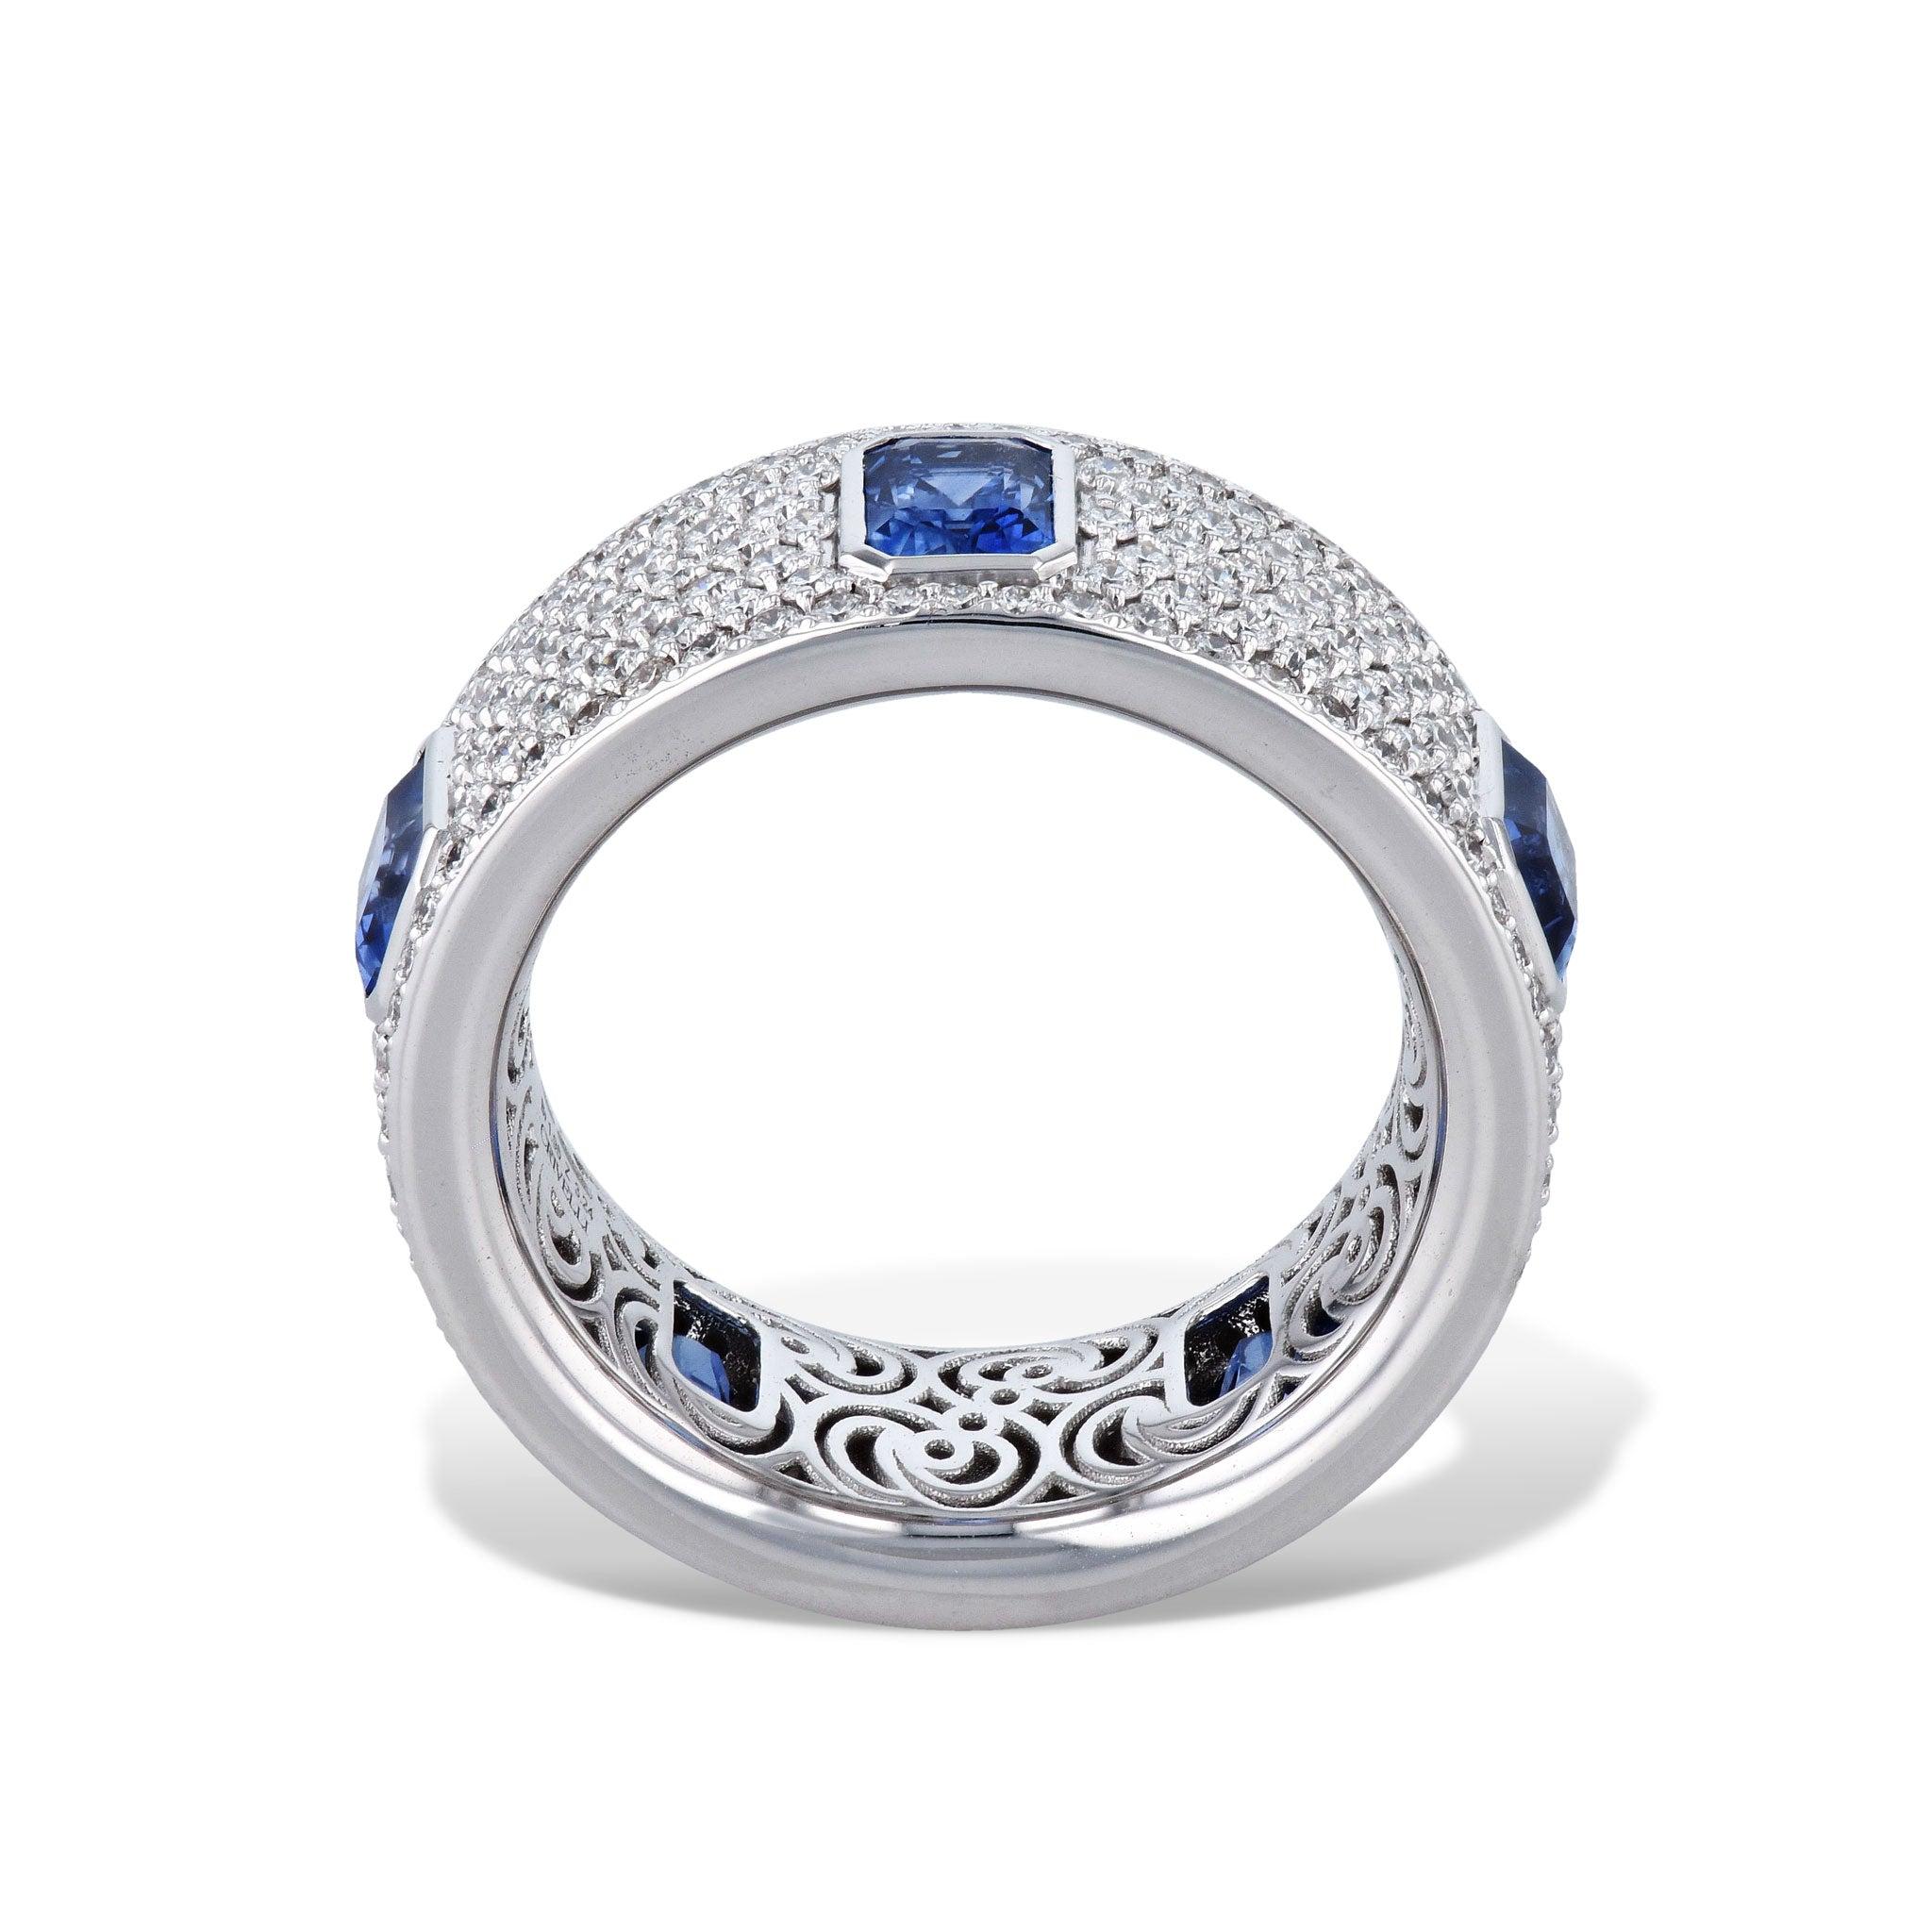 This blue sapphire and diamonds ring is dazzling.
The stones are set in luxurious 18 Karat White Gold.
Blue Sapphire Diamond Pave Ring.

-3.24ct Blue Sapphire.
-1.96ct TW Diamond F-VS.
-18kt. White Gold.

Size 6.75

